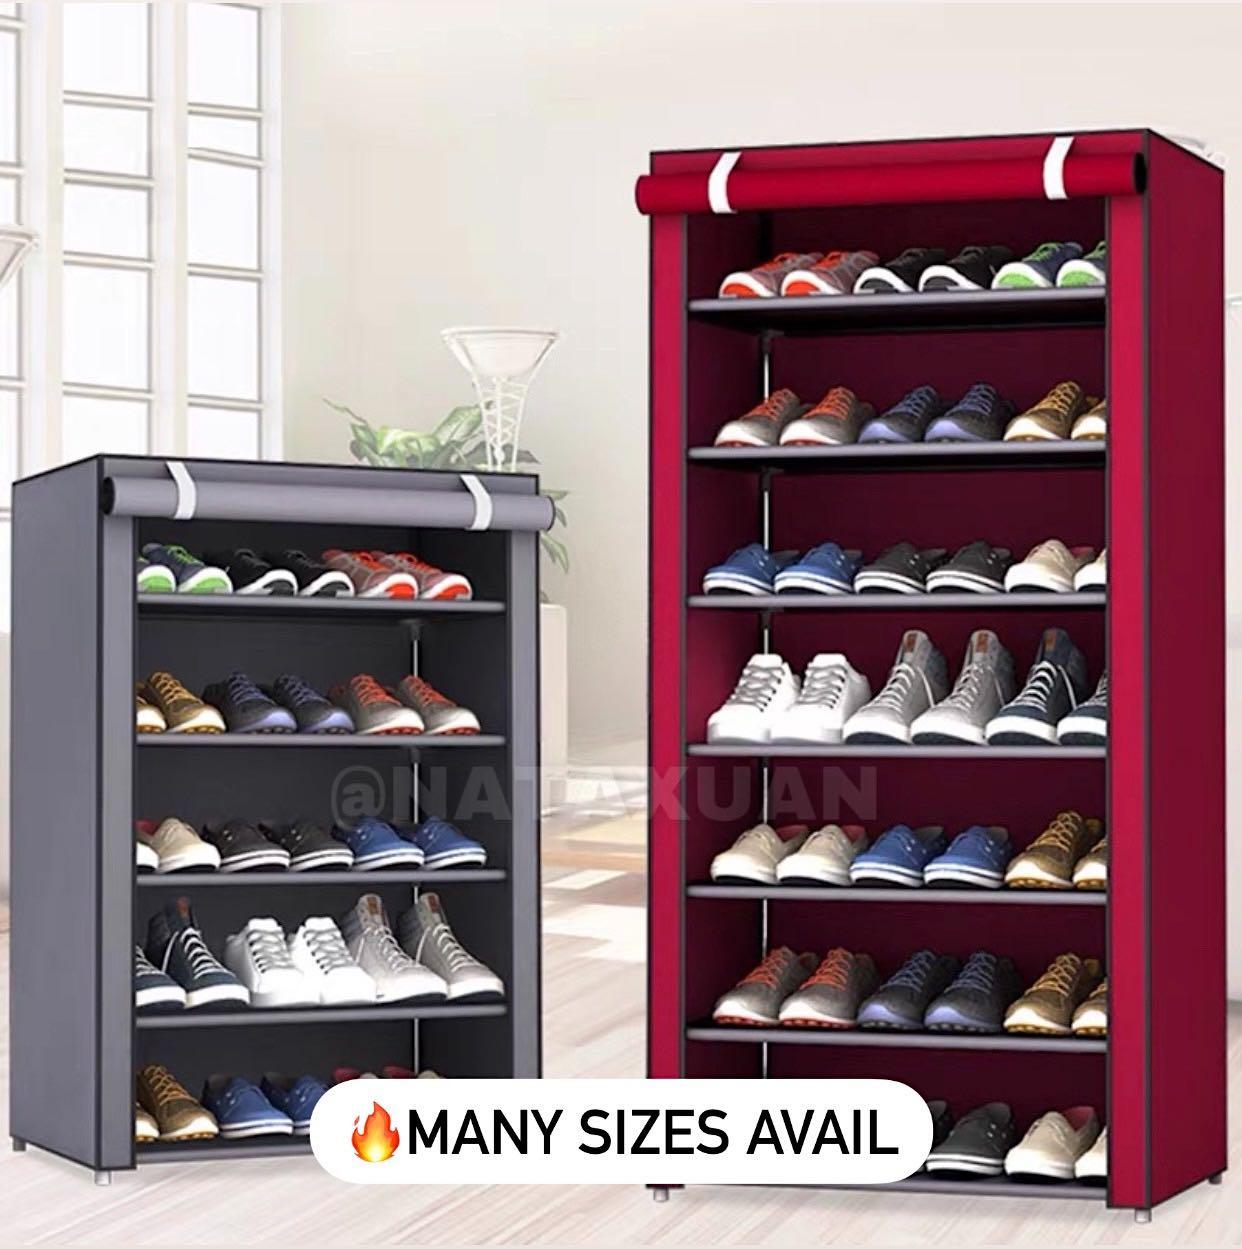 https://media.karousell.com/media/photos/products/2021/8/11/free_courier_shoe_rack_1628714926_f5a4a830_progressive.jpg